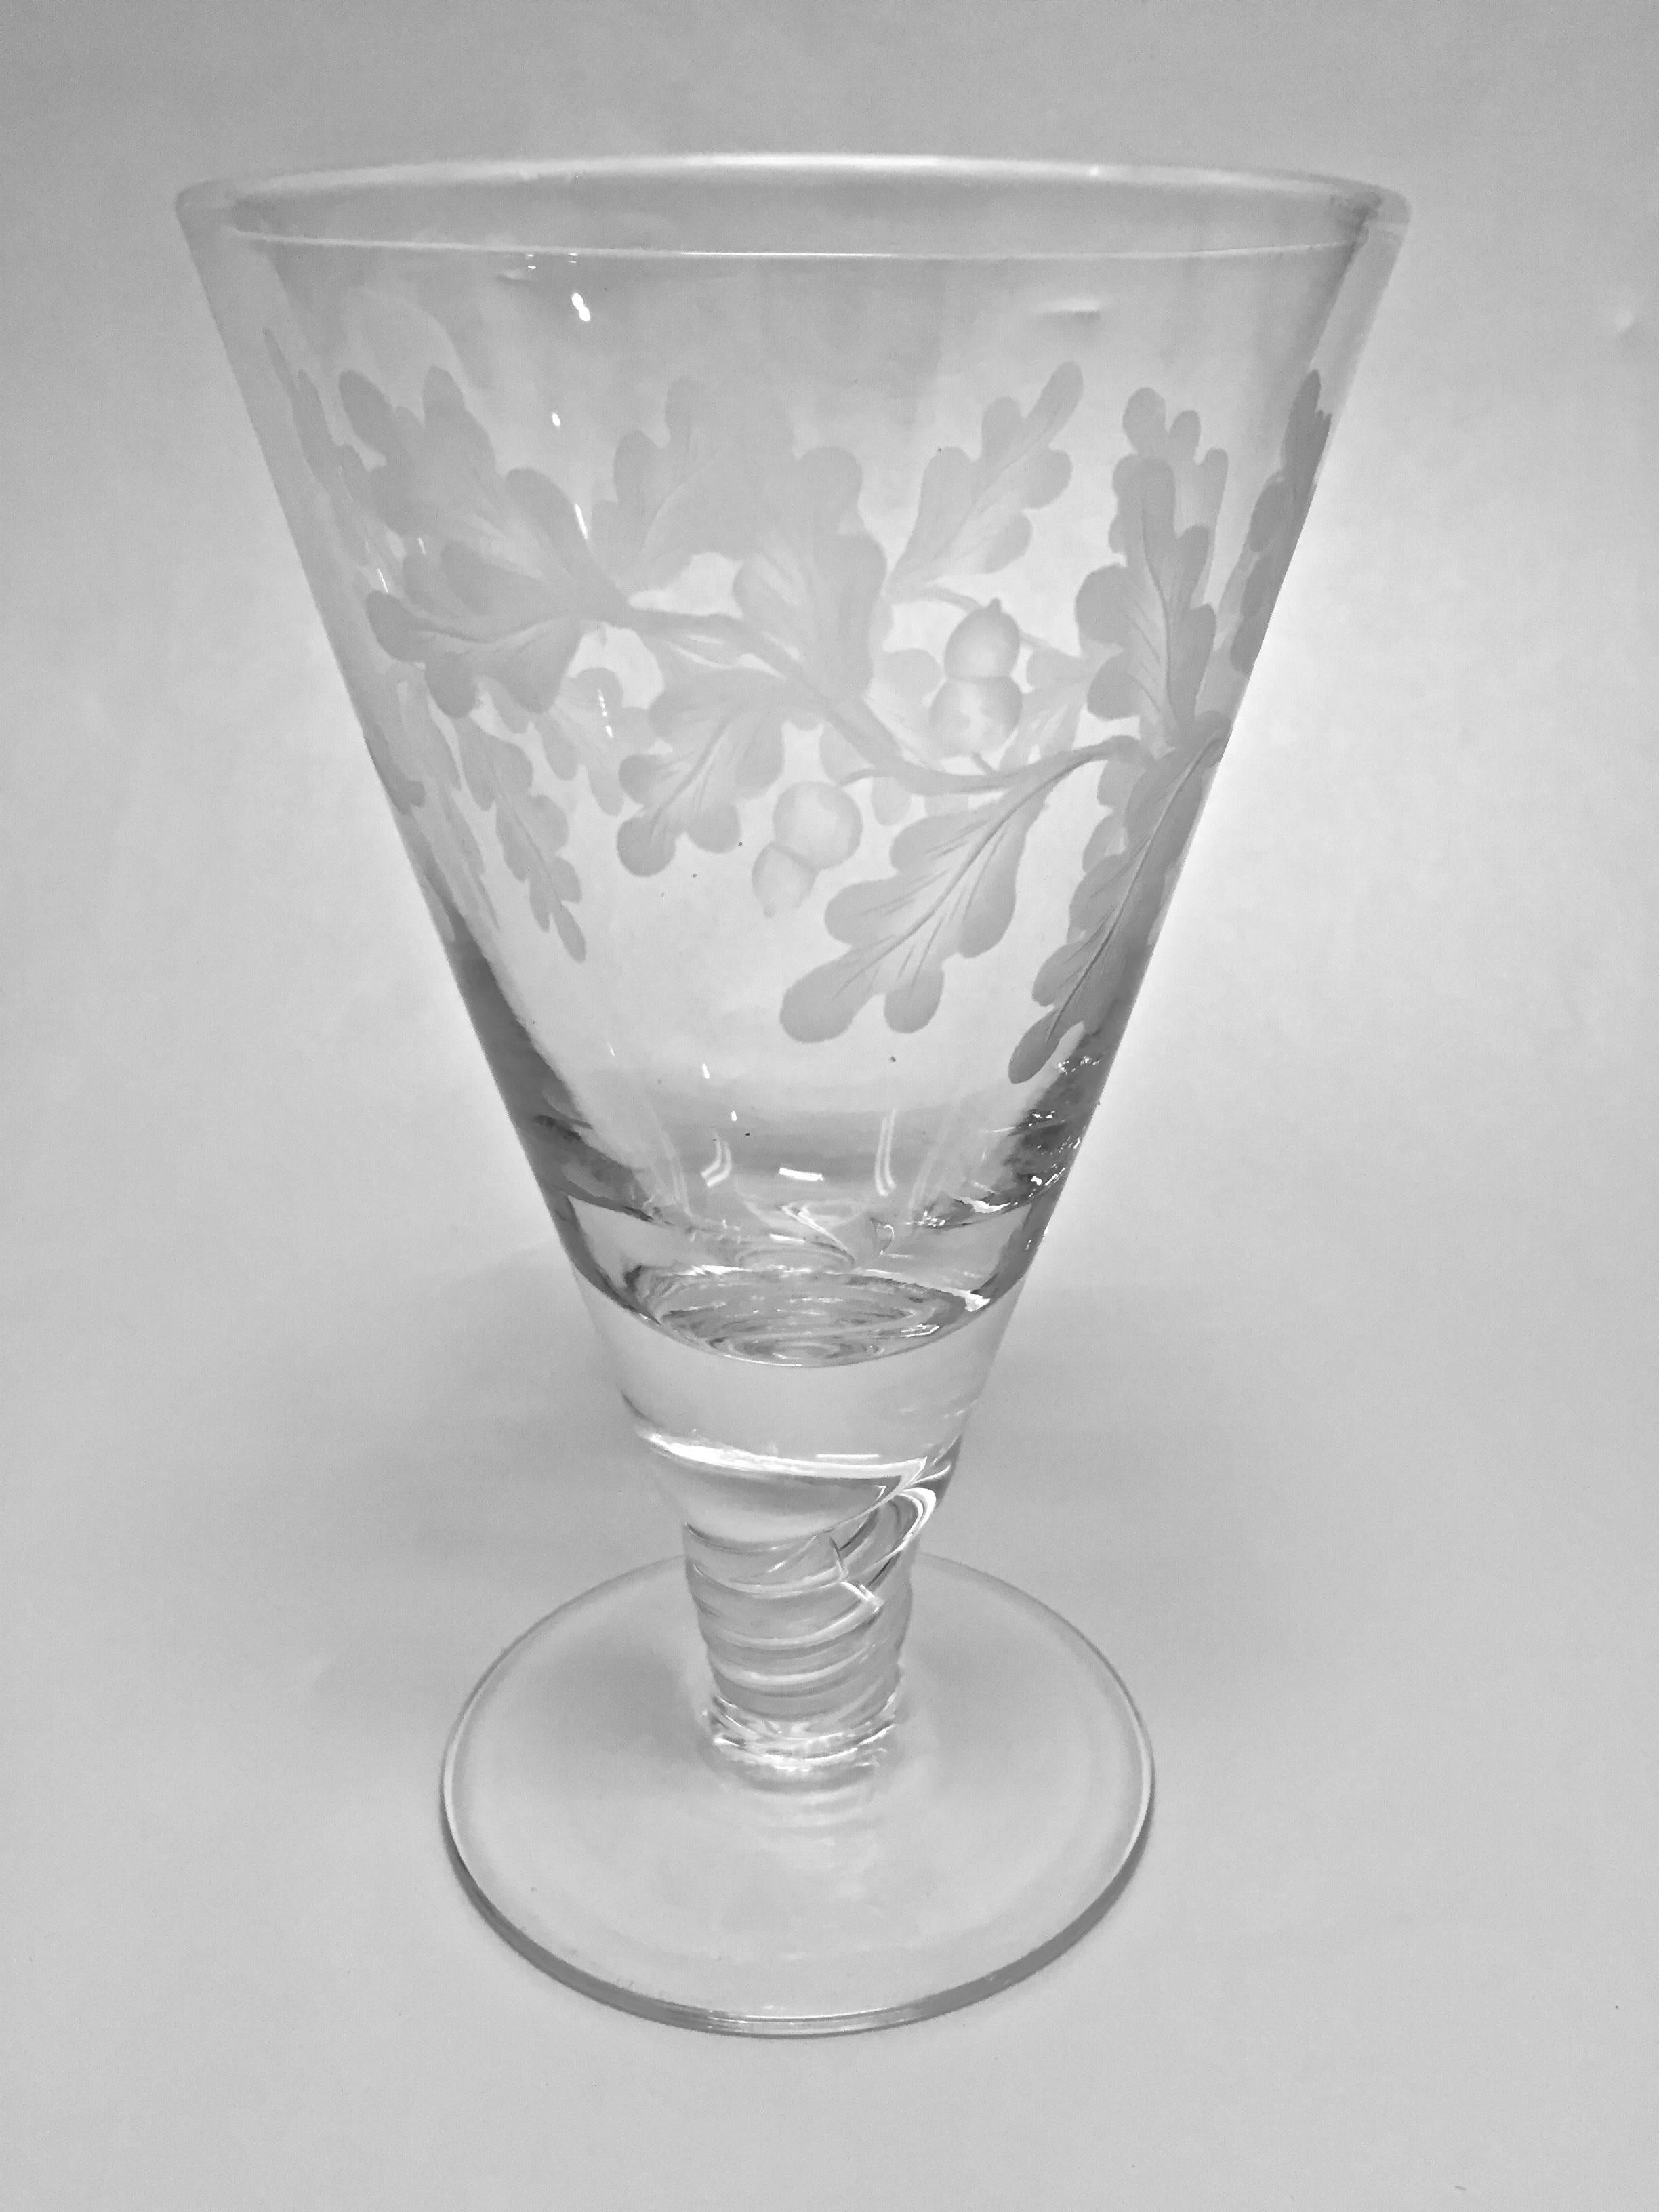 Webb Glass Co. Deeply Etched Stemware Oak Leaves and Acorns England 50s In Excellent Condition For Sale In Redding, CA